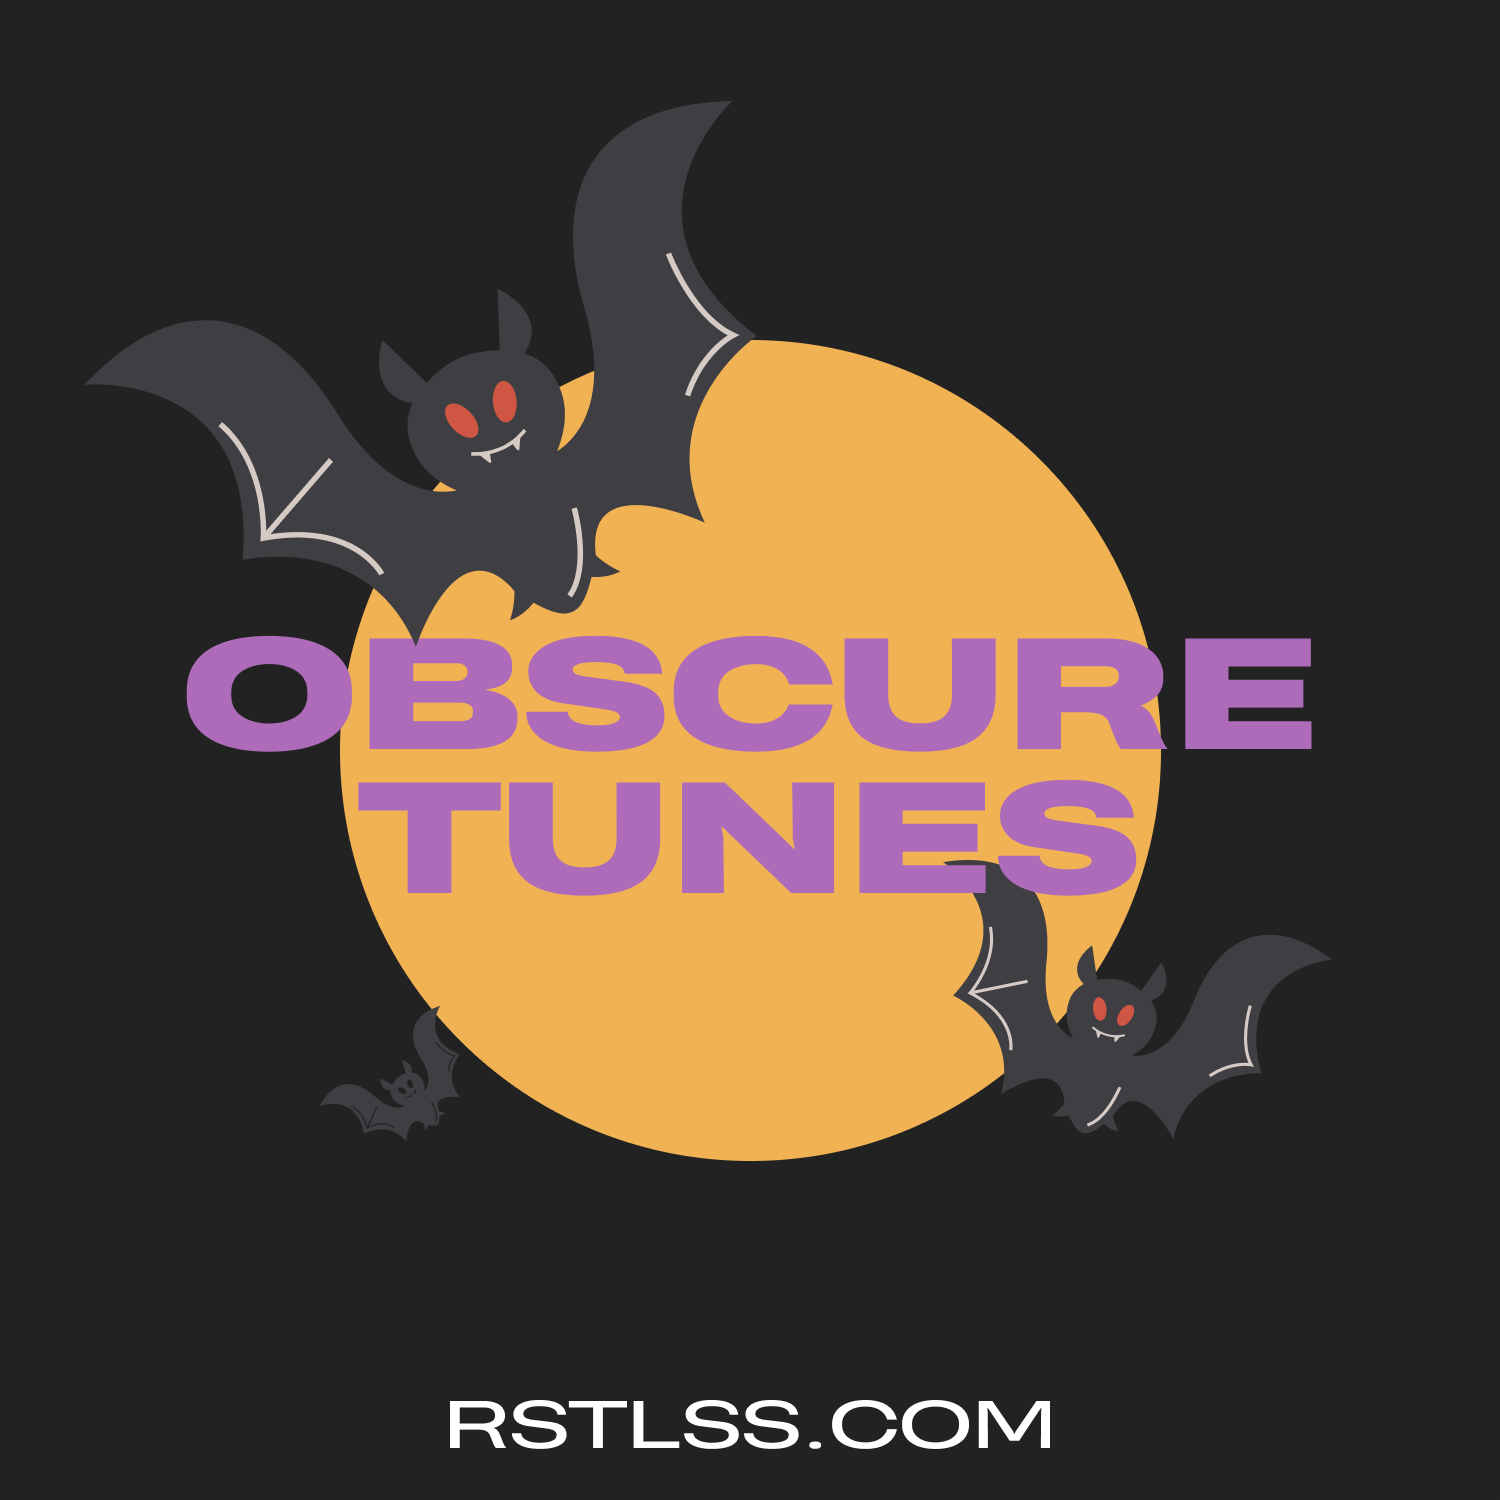 OBSCURE TUNES #4 – Innerlove, Oldstar, Chime School, About Leaving…